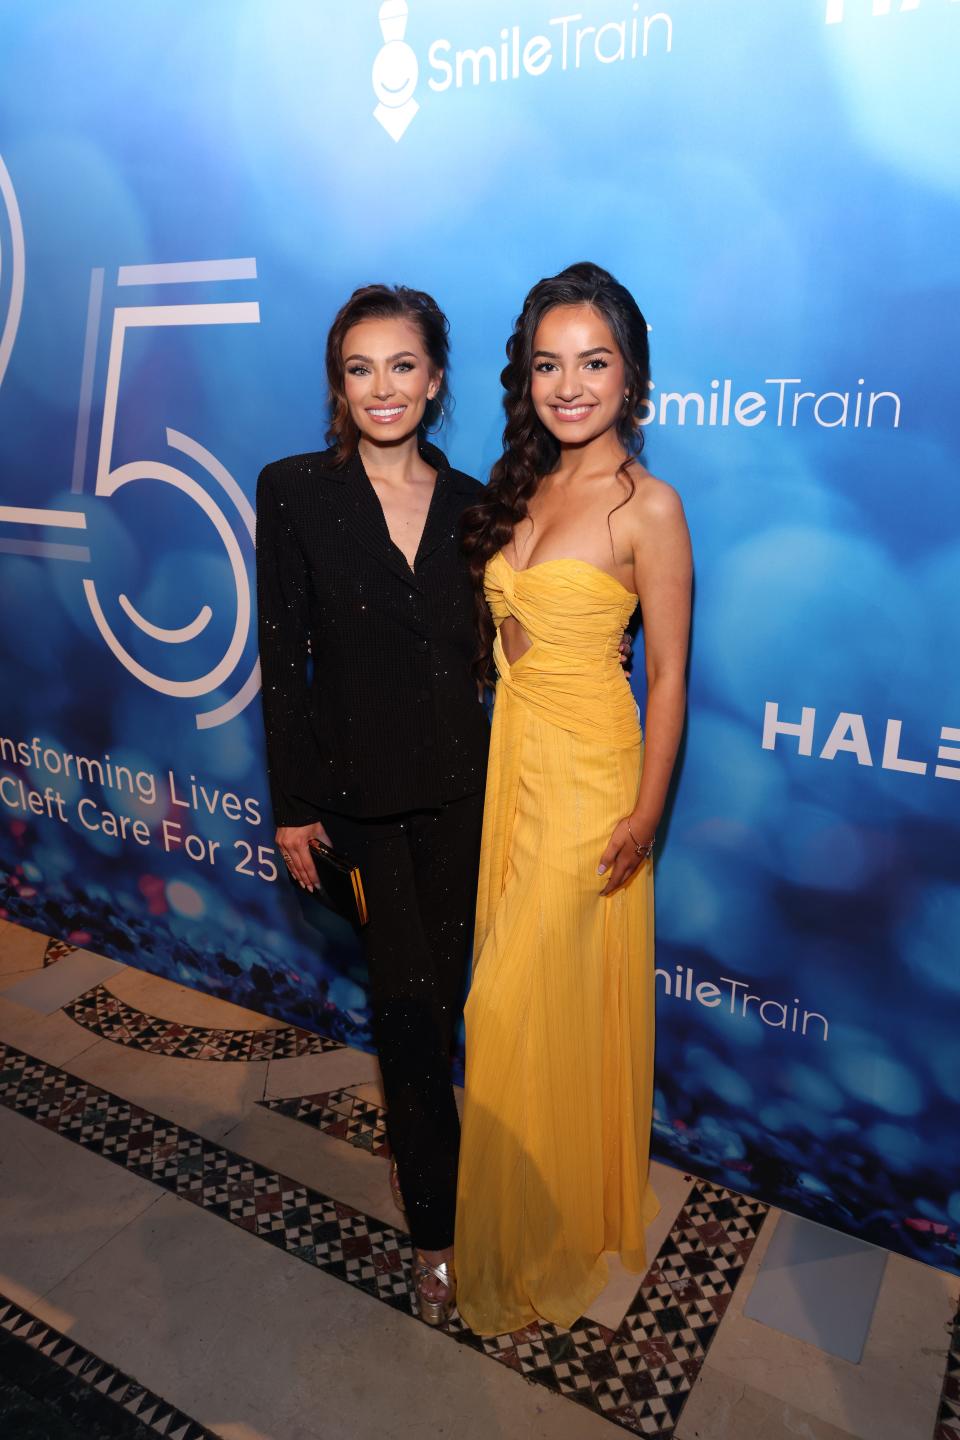 Noelia Voigt and UmaSofia Srivastava attend the Smile Train 25th Anniversary Gala at Cipriani 42nd Street on May 8, 2024, in New York City.